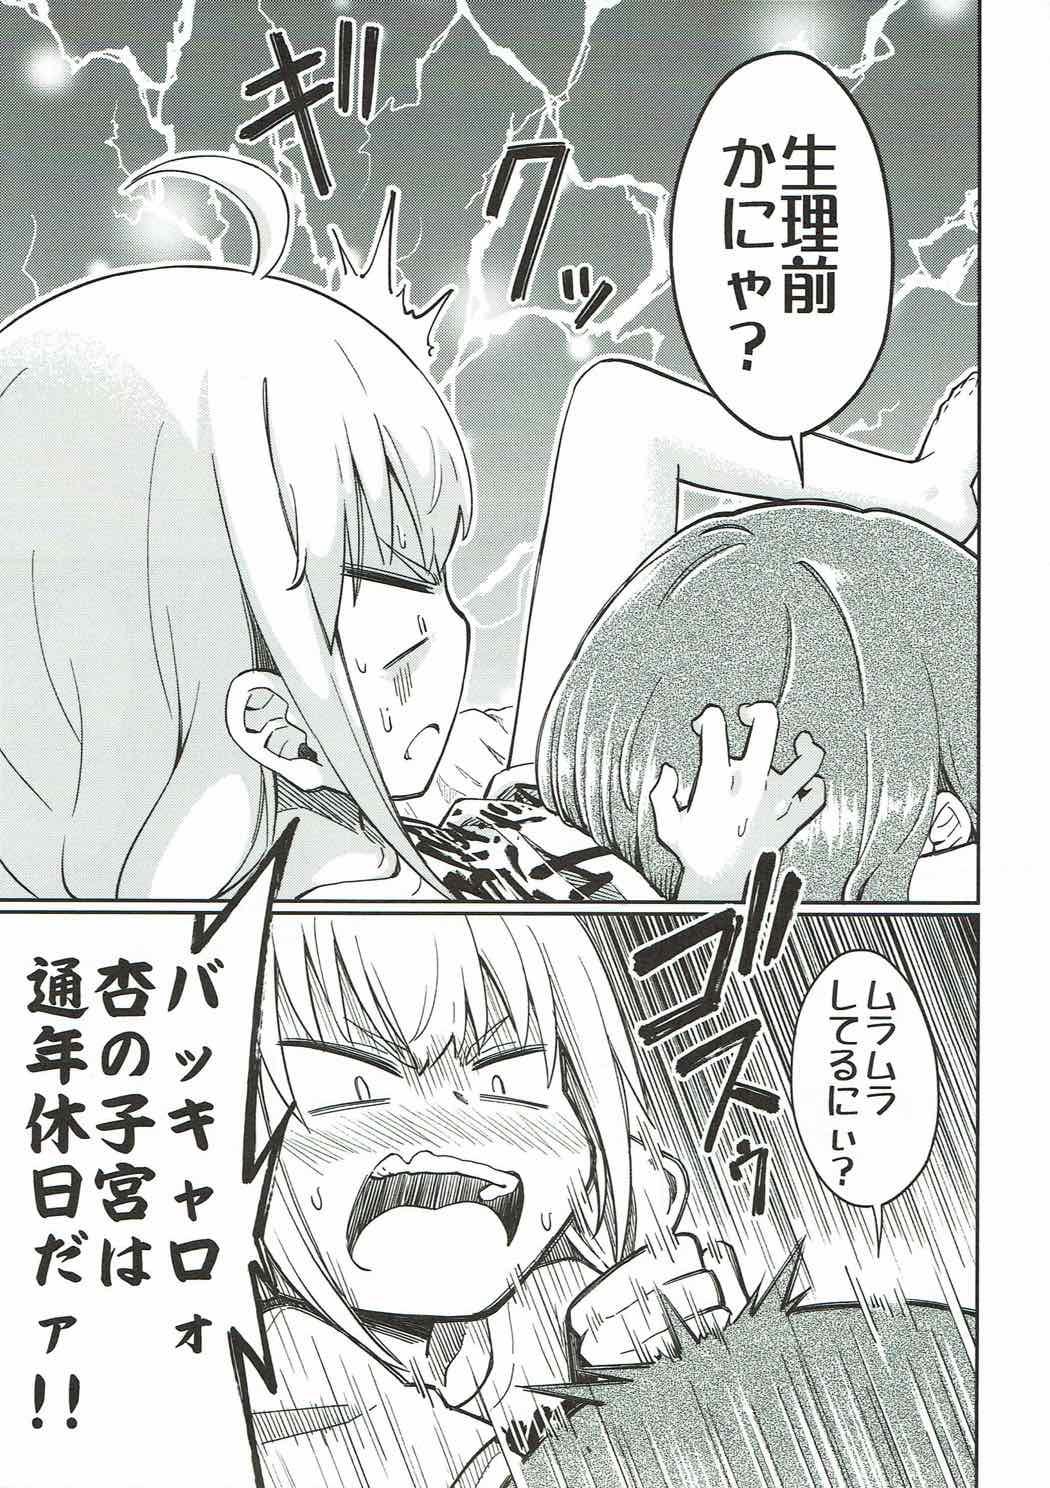 Juggs Lovely Girls' Lily Vol. 16 - The idolmaster Insertion - Page 10